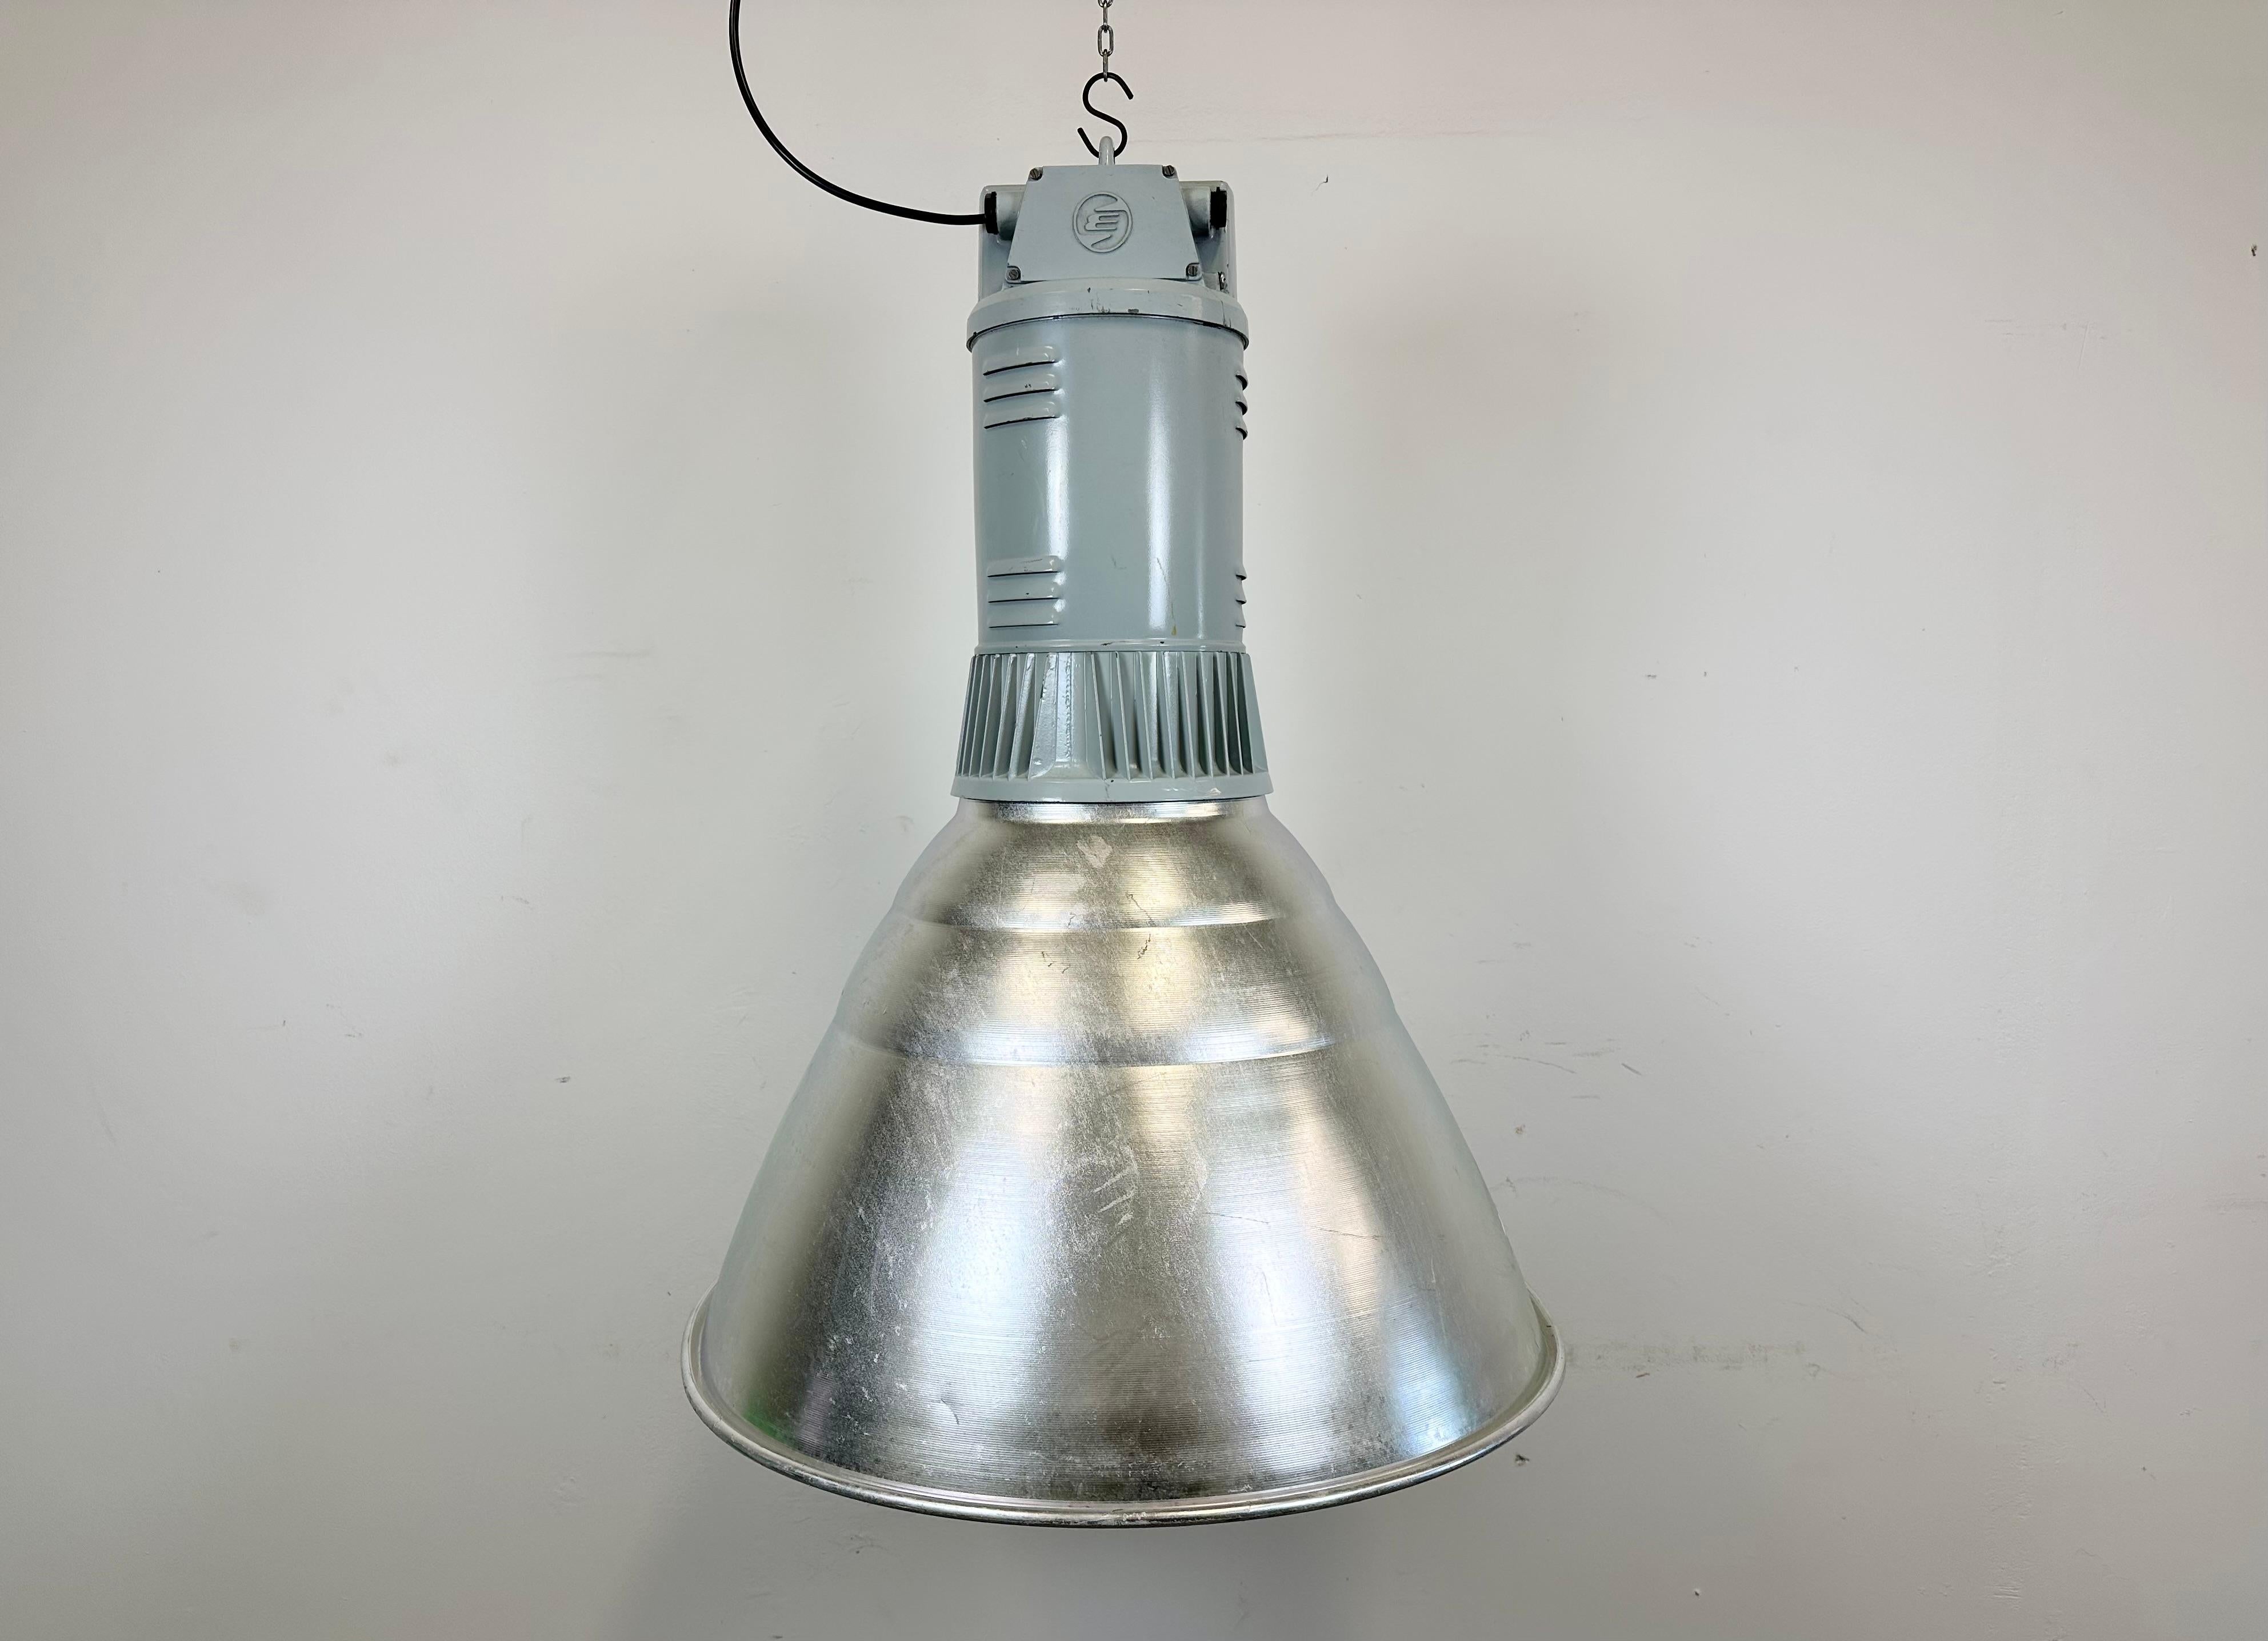 This pendant lamp was made by Elektrosvit and originally used in a factories in former Czechoslovakia in the 1960s. The piece is comprised of an aluminium body and a cast aluminium top. The lamp is fully functional and features a new porcelain E27/